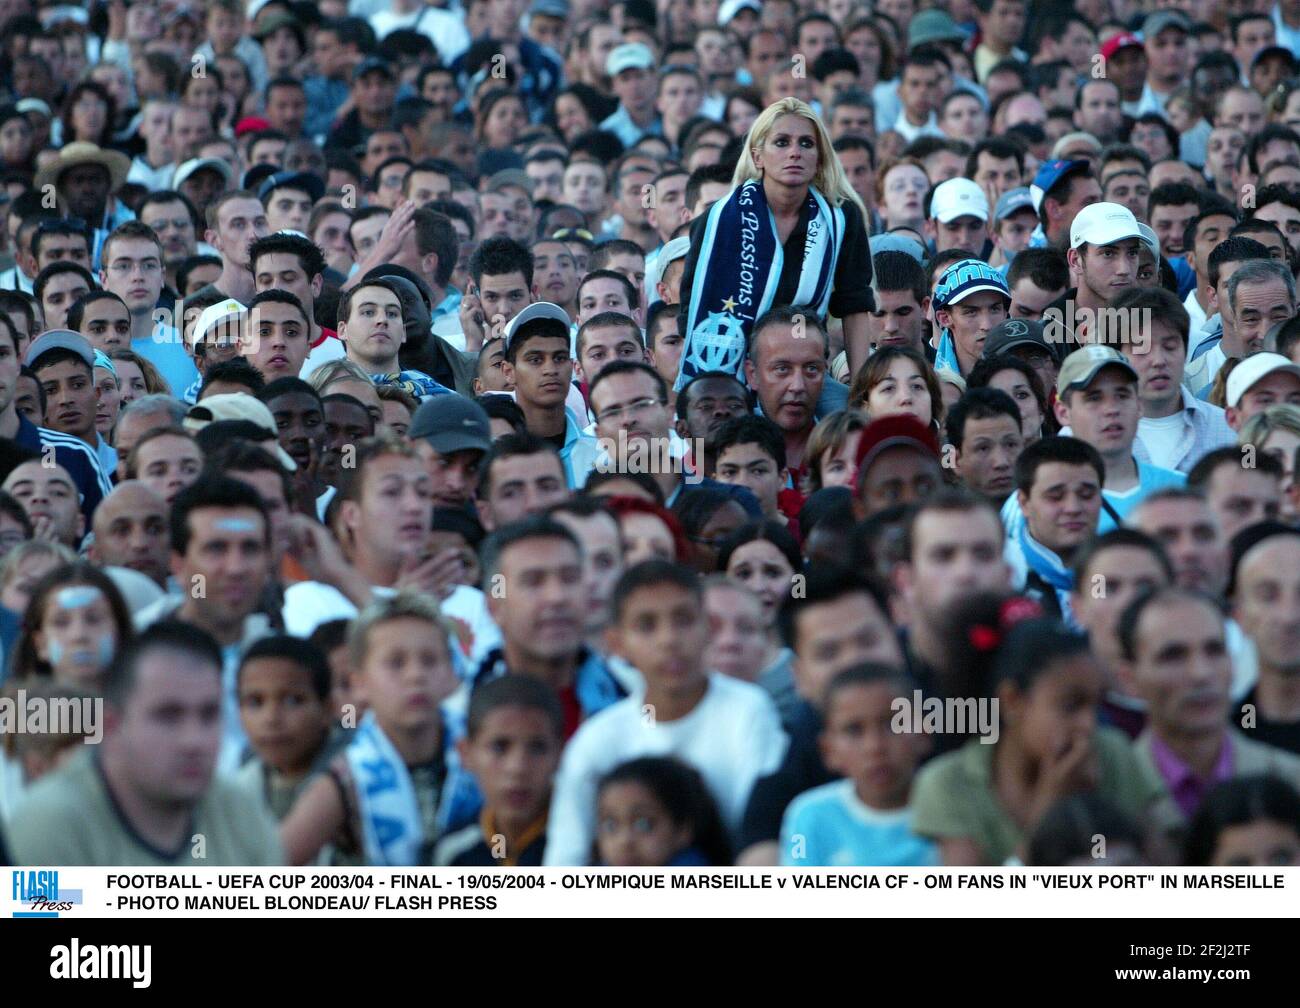 - UEFA CUP 2003/04 - FINAL - 19/05/2004 - OLYMPIQUE MARSEILLE v VALENCIA CF - OM FANS IN "VIEUX PORT" IN MARSEILLE - MANUEL BLONDEAU/ FLASH PRESS Stock Photo - Alamy